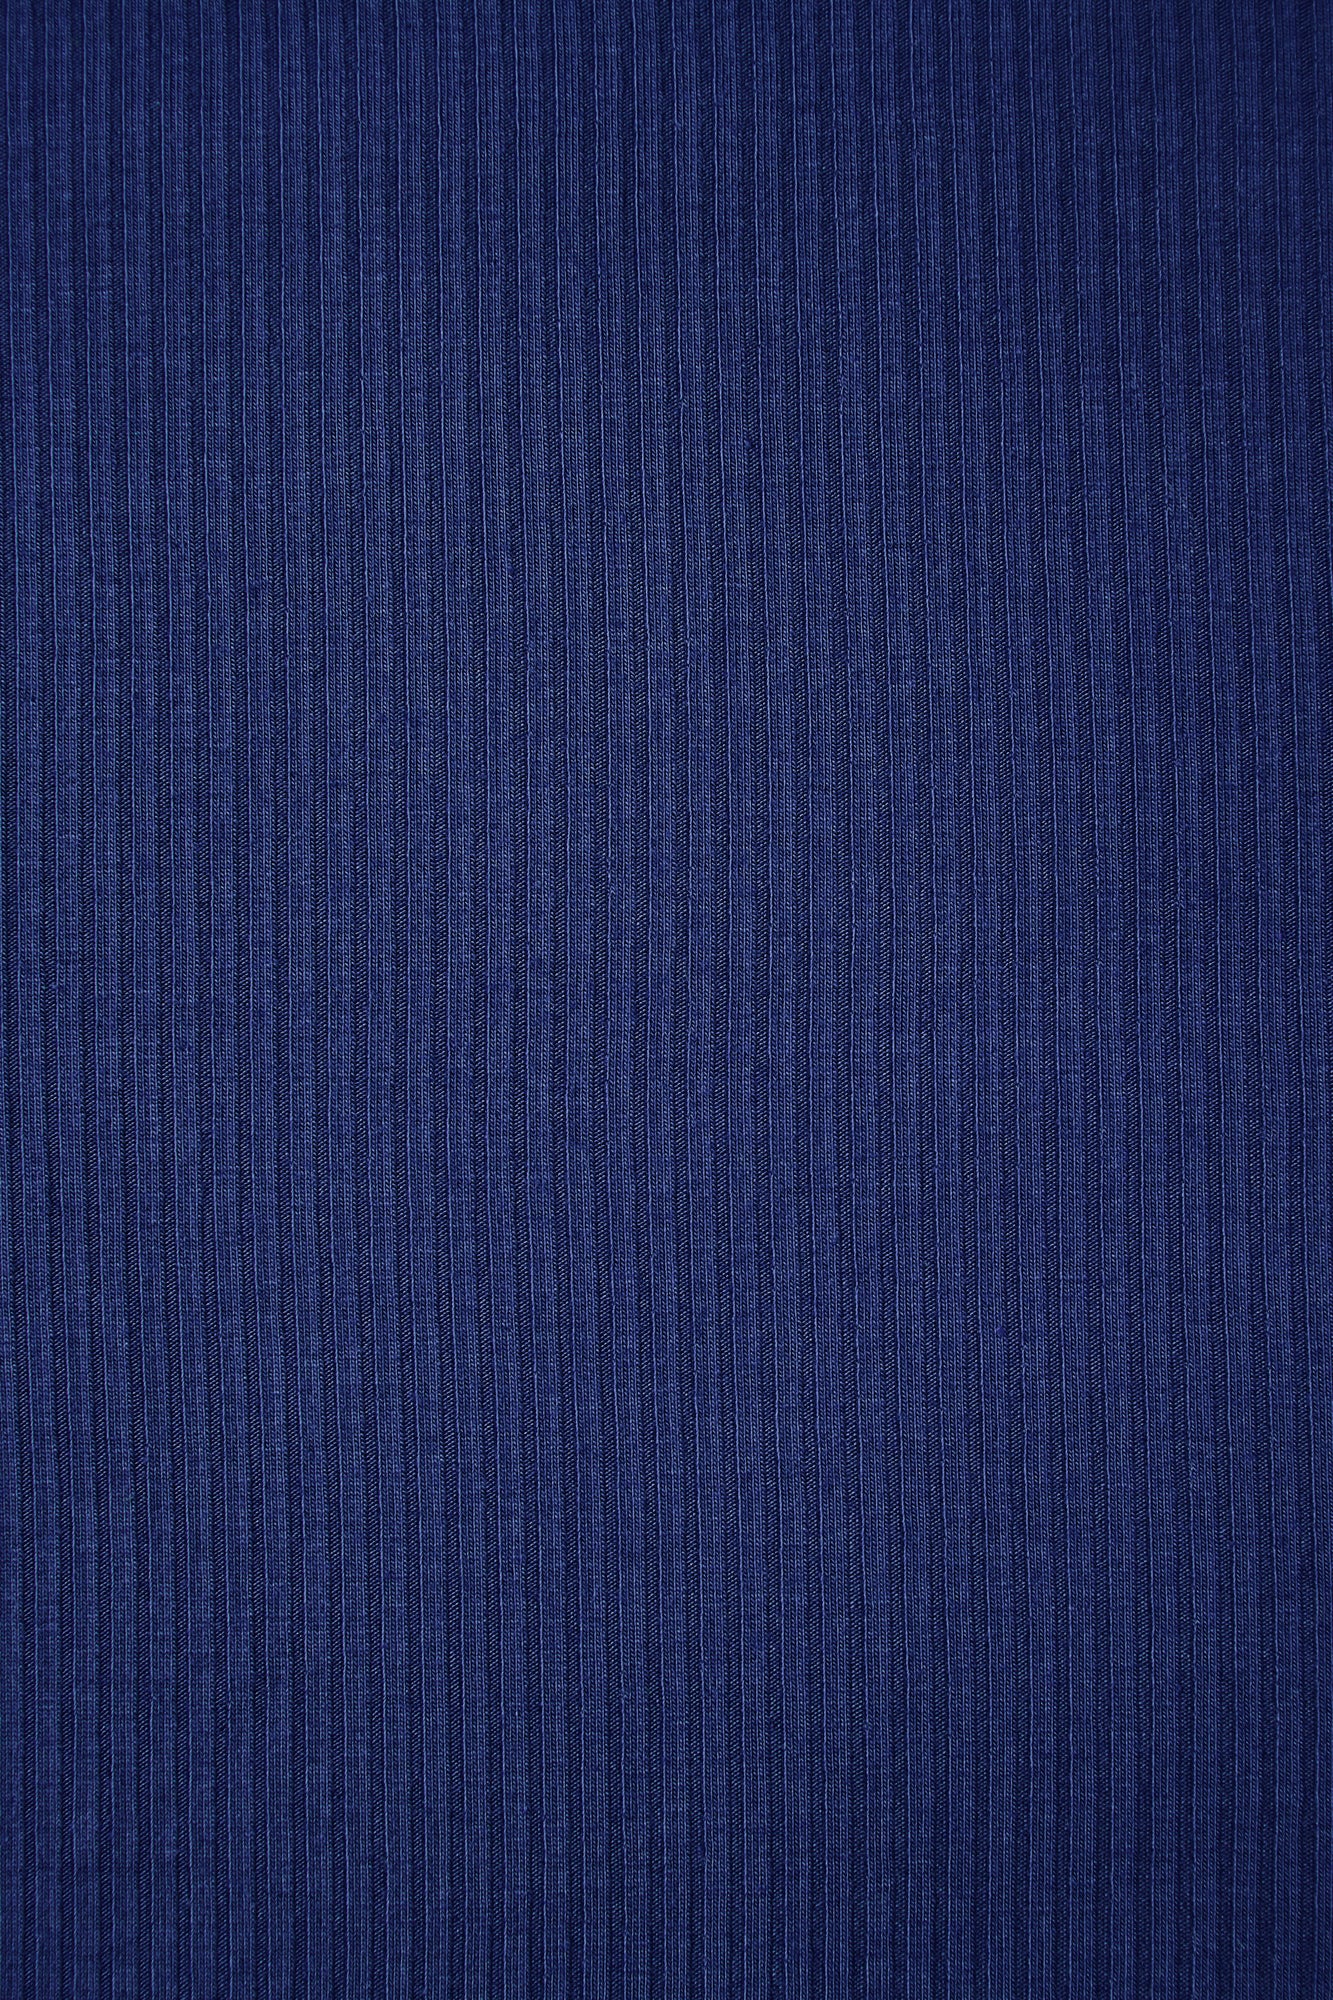 REMNANT 0.21 metre - Derby Ribbed Jersey Lapis with TENCEL™ Modal Fibres